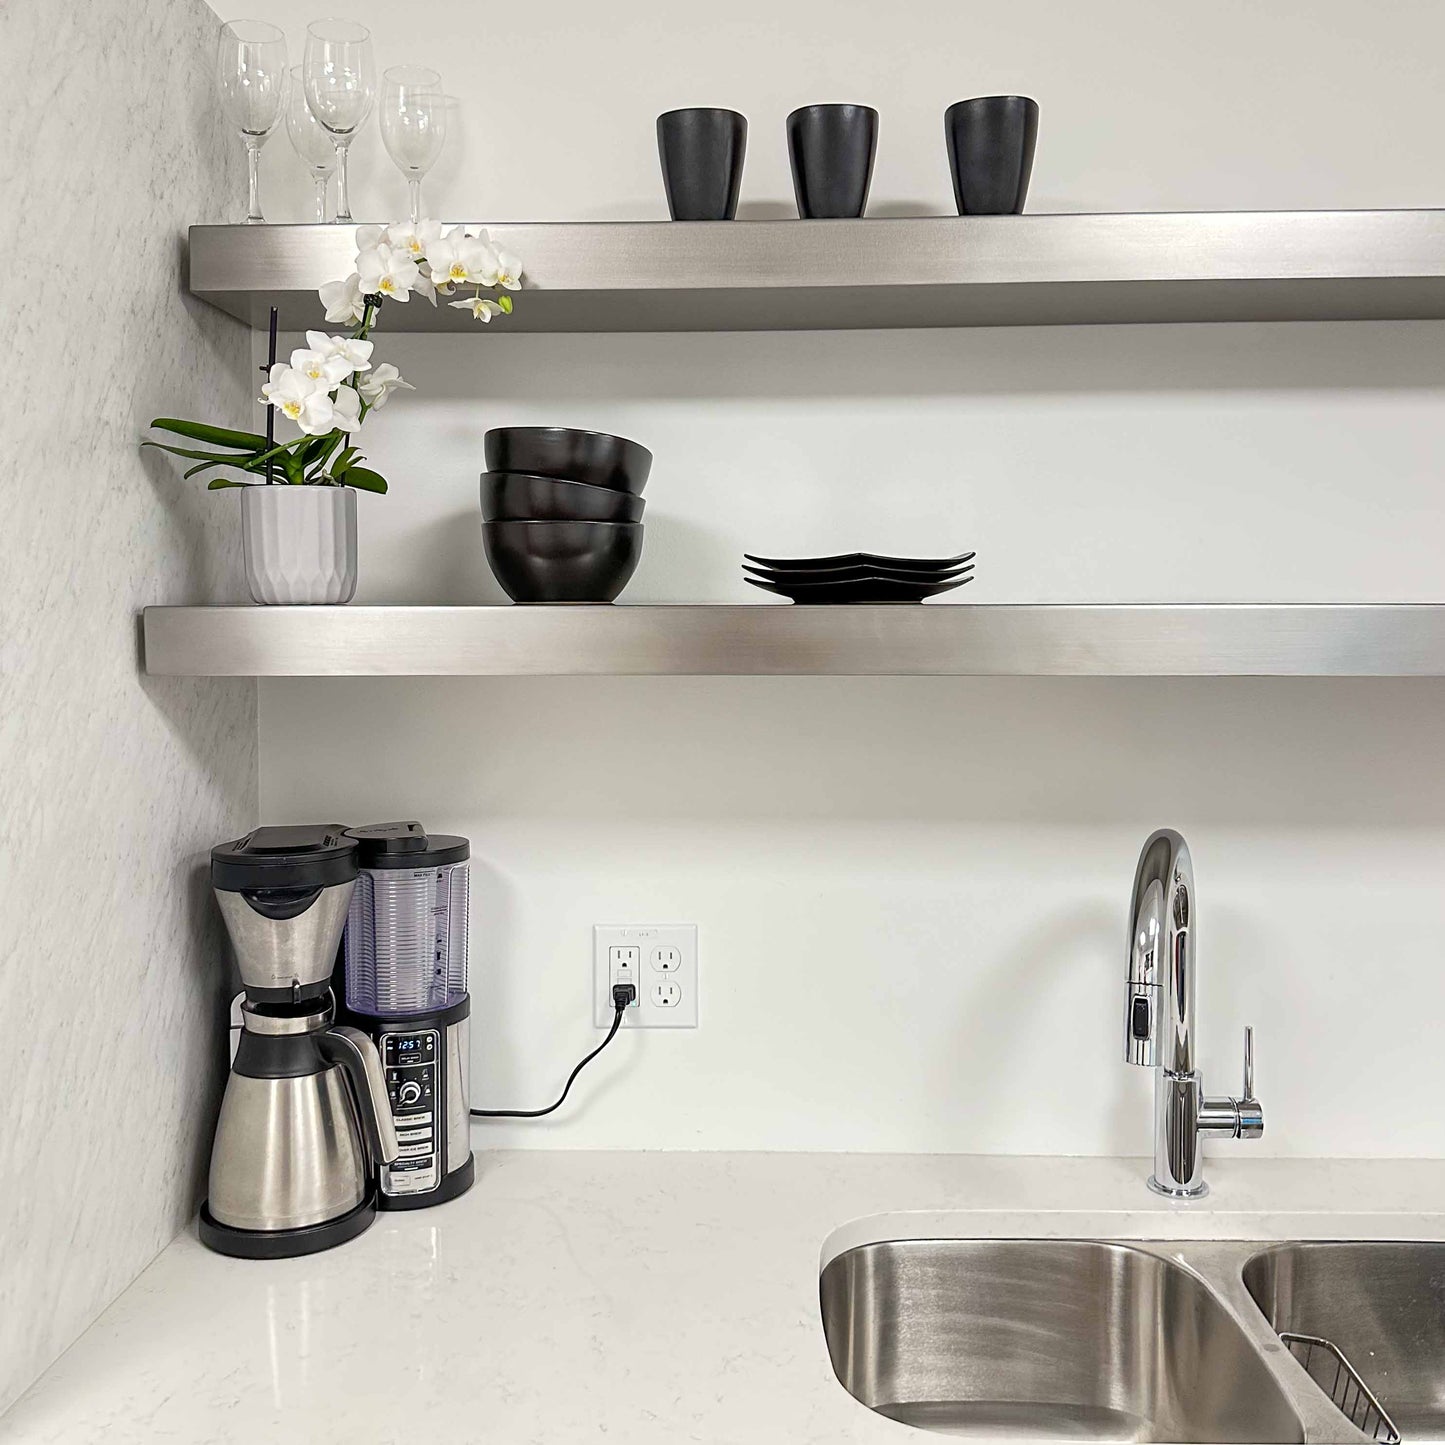 Stainless Steel Floating Shelf 8" Deep for Kitchen, Bathroom and Home